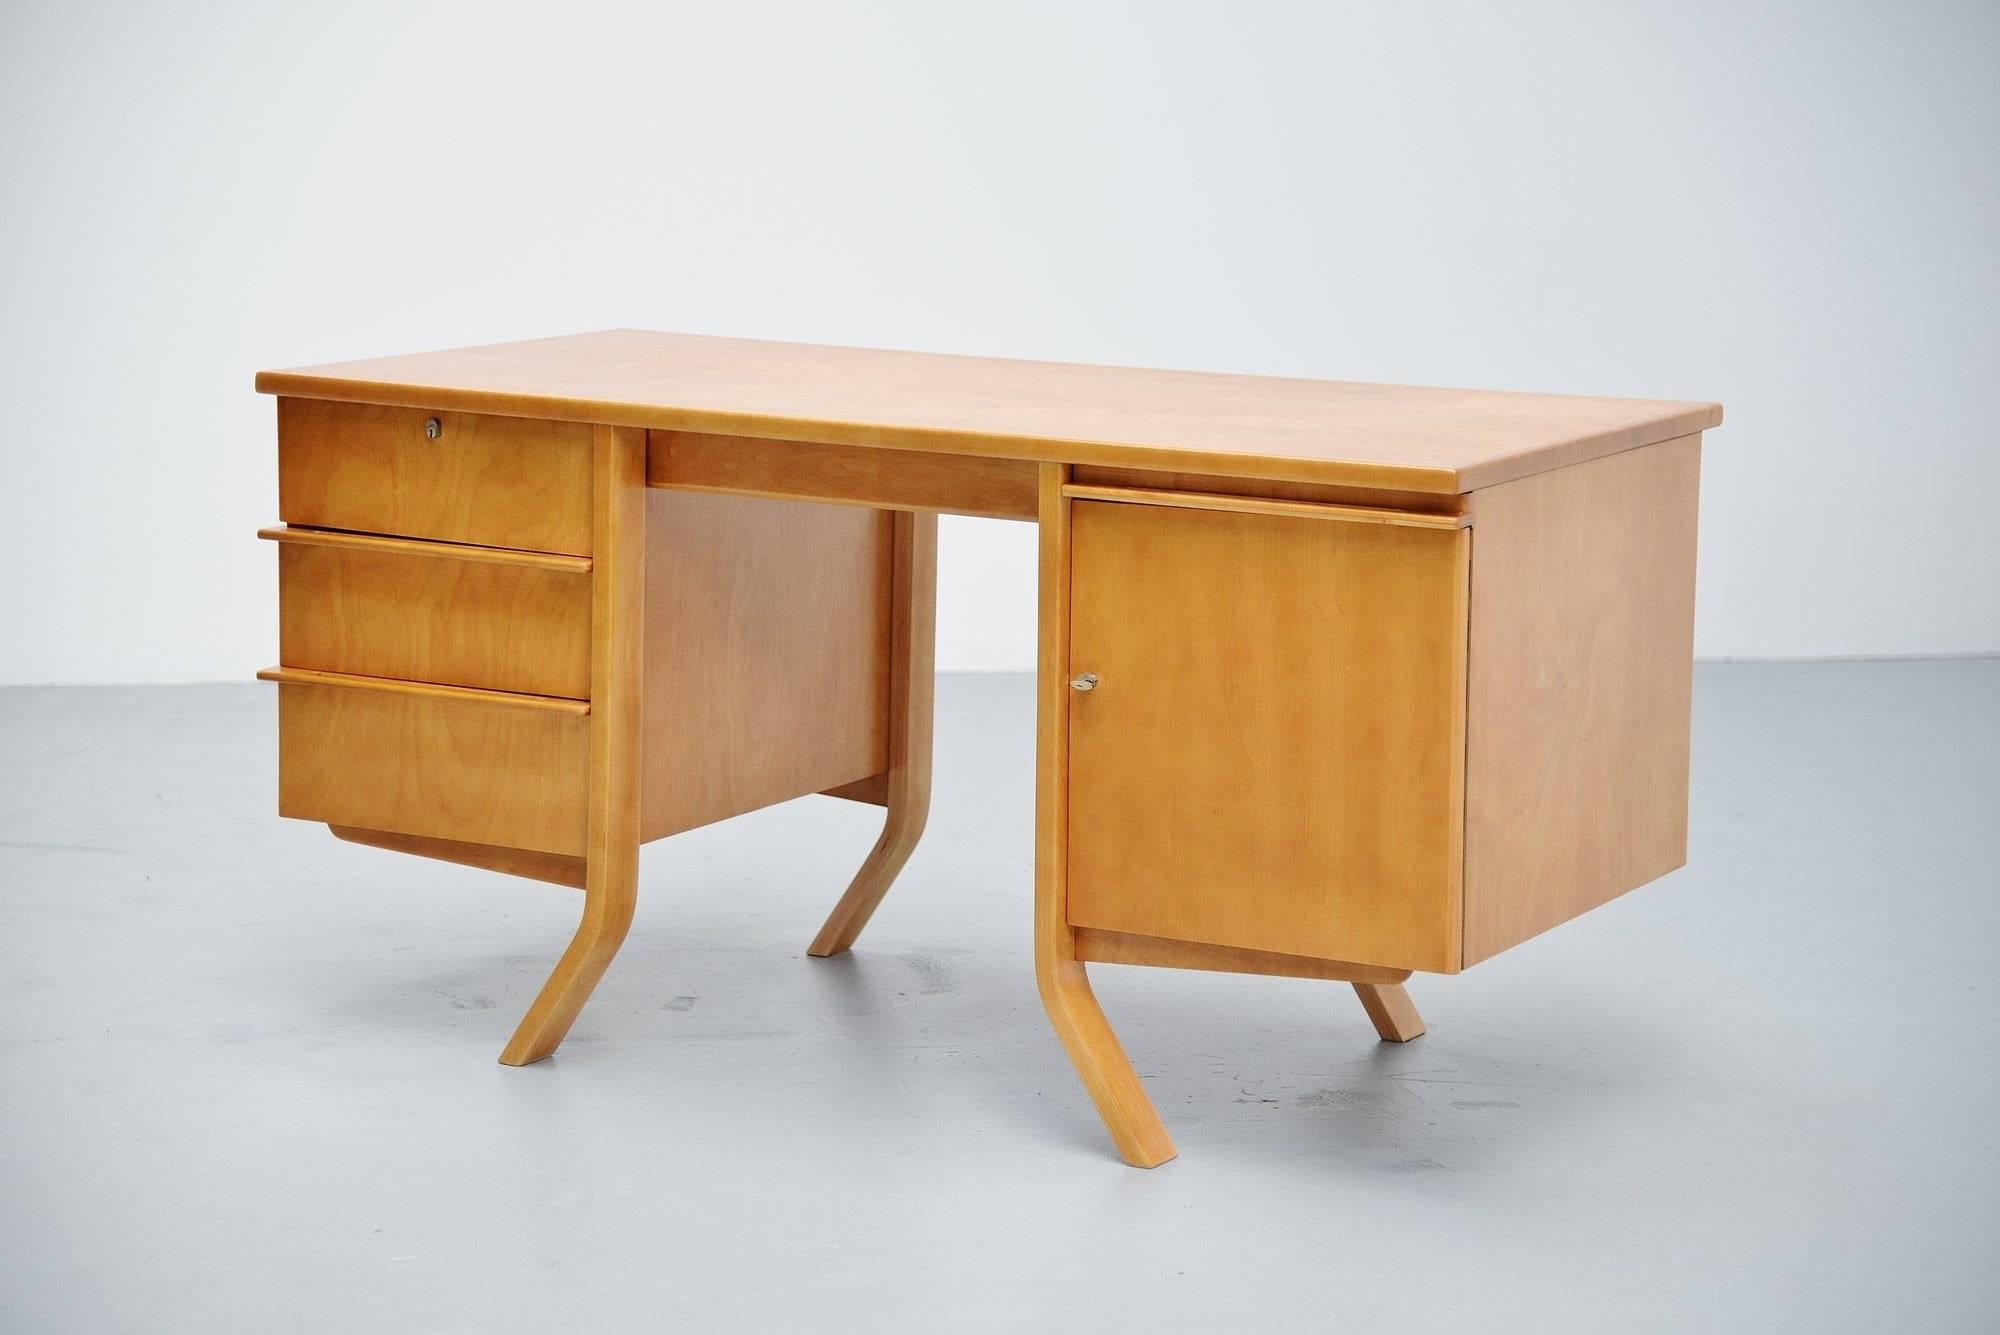 Nice Dutch modernist desk designed by Cees Braakman and manufactures by Pastoe UMS, Holland 1952. The desk is made of birch plywood and has a very nice dynamic floating shape. The legs in the middle make this desk very spatially. On the left there